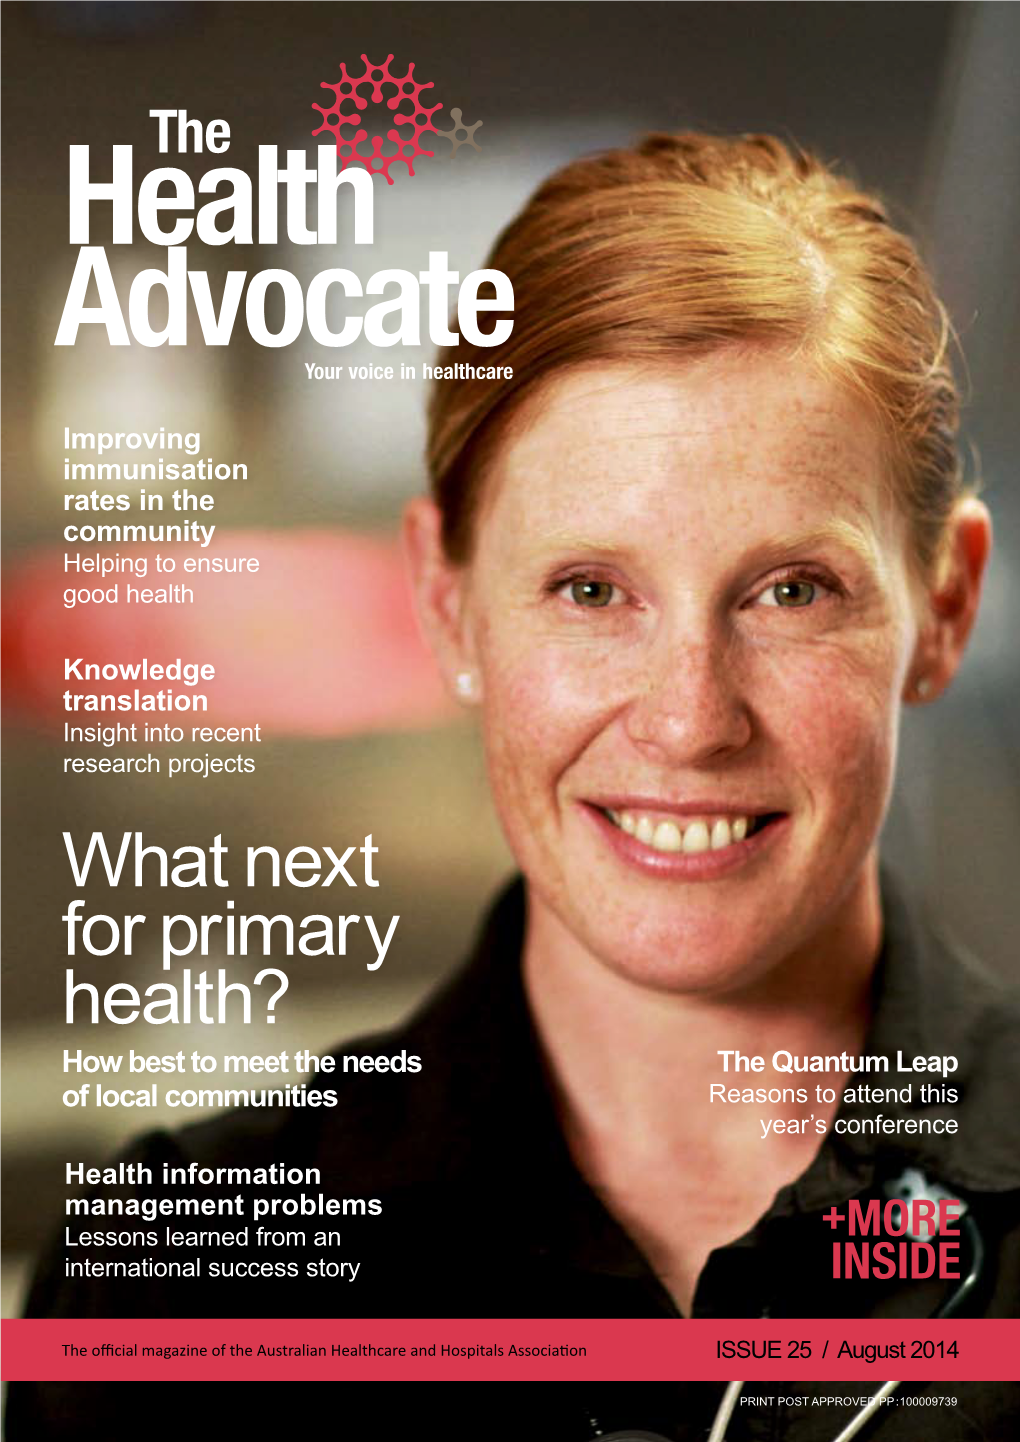 The Health Advocate, Evidence-Based Health Roles